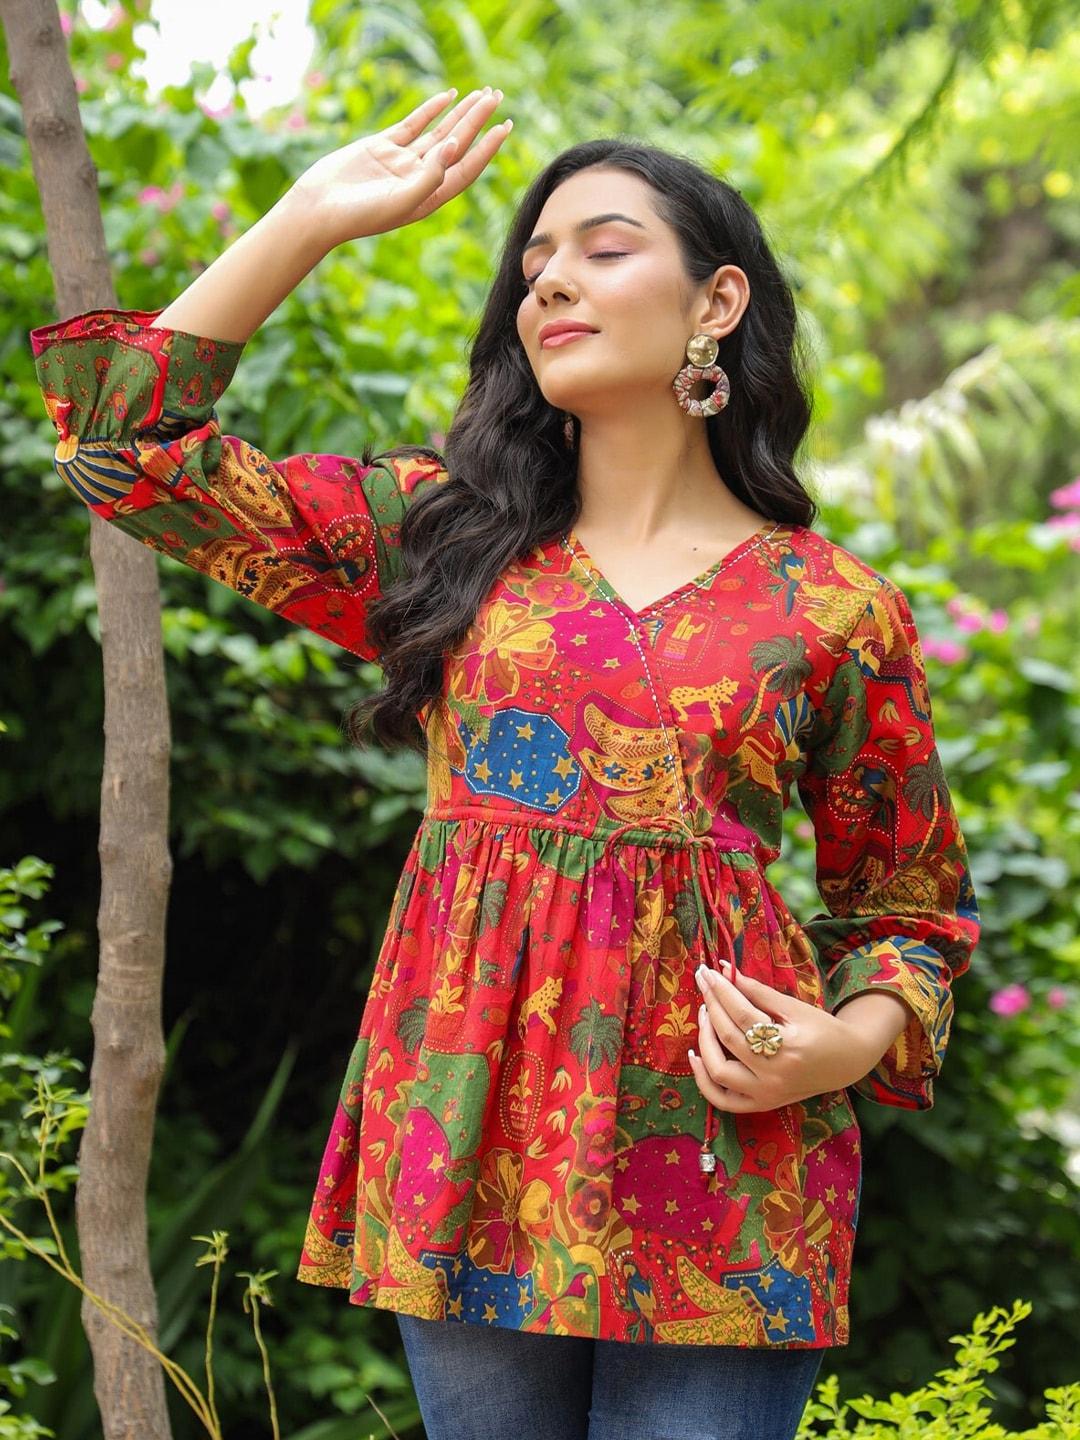 rain-&-rainbow-red-floral-print-flared-sleeve-cotton-top